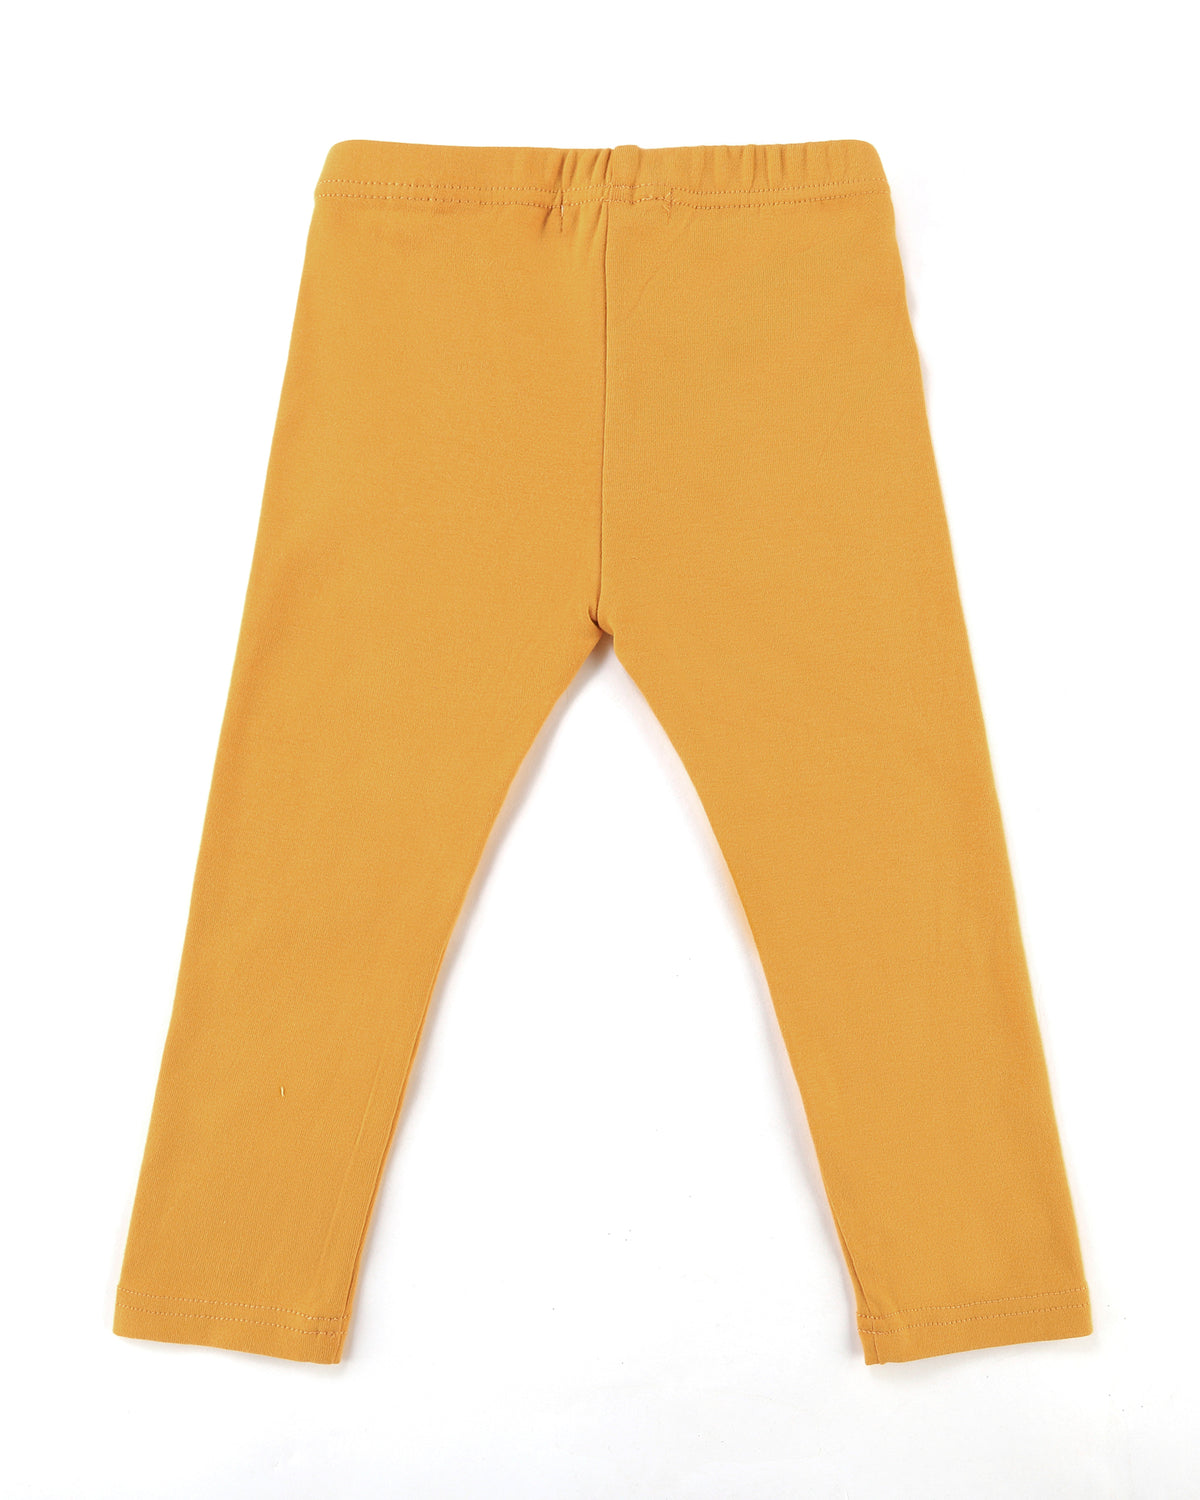 Here to stay Leggings in Mustard Back